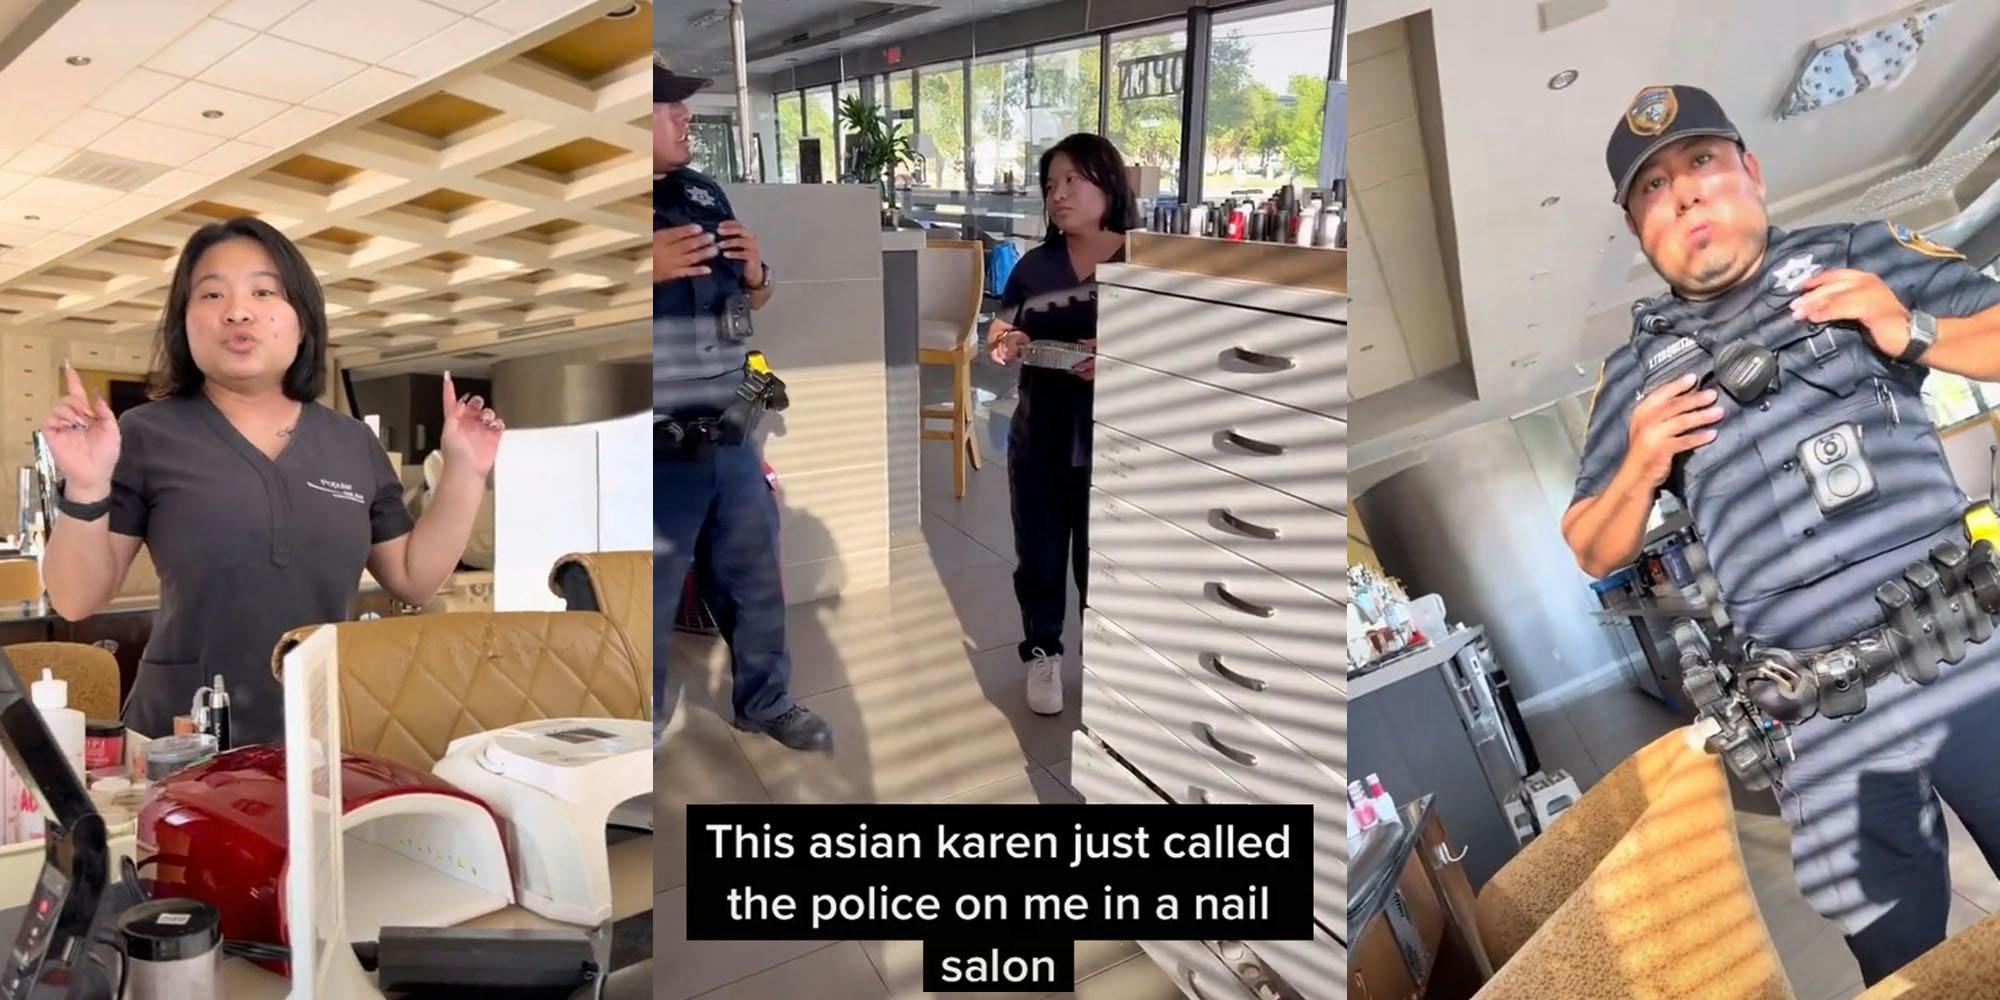 Nail salon worker speaking fingers pointed up (l) Nail salon worker speaking to police officer in salon caption 